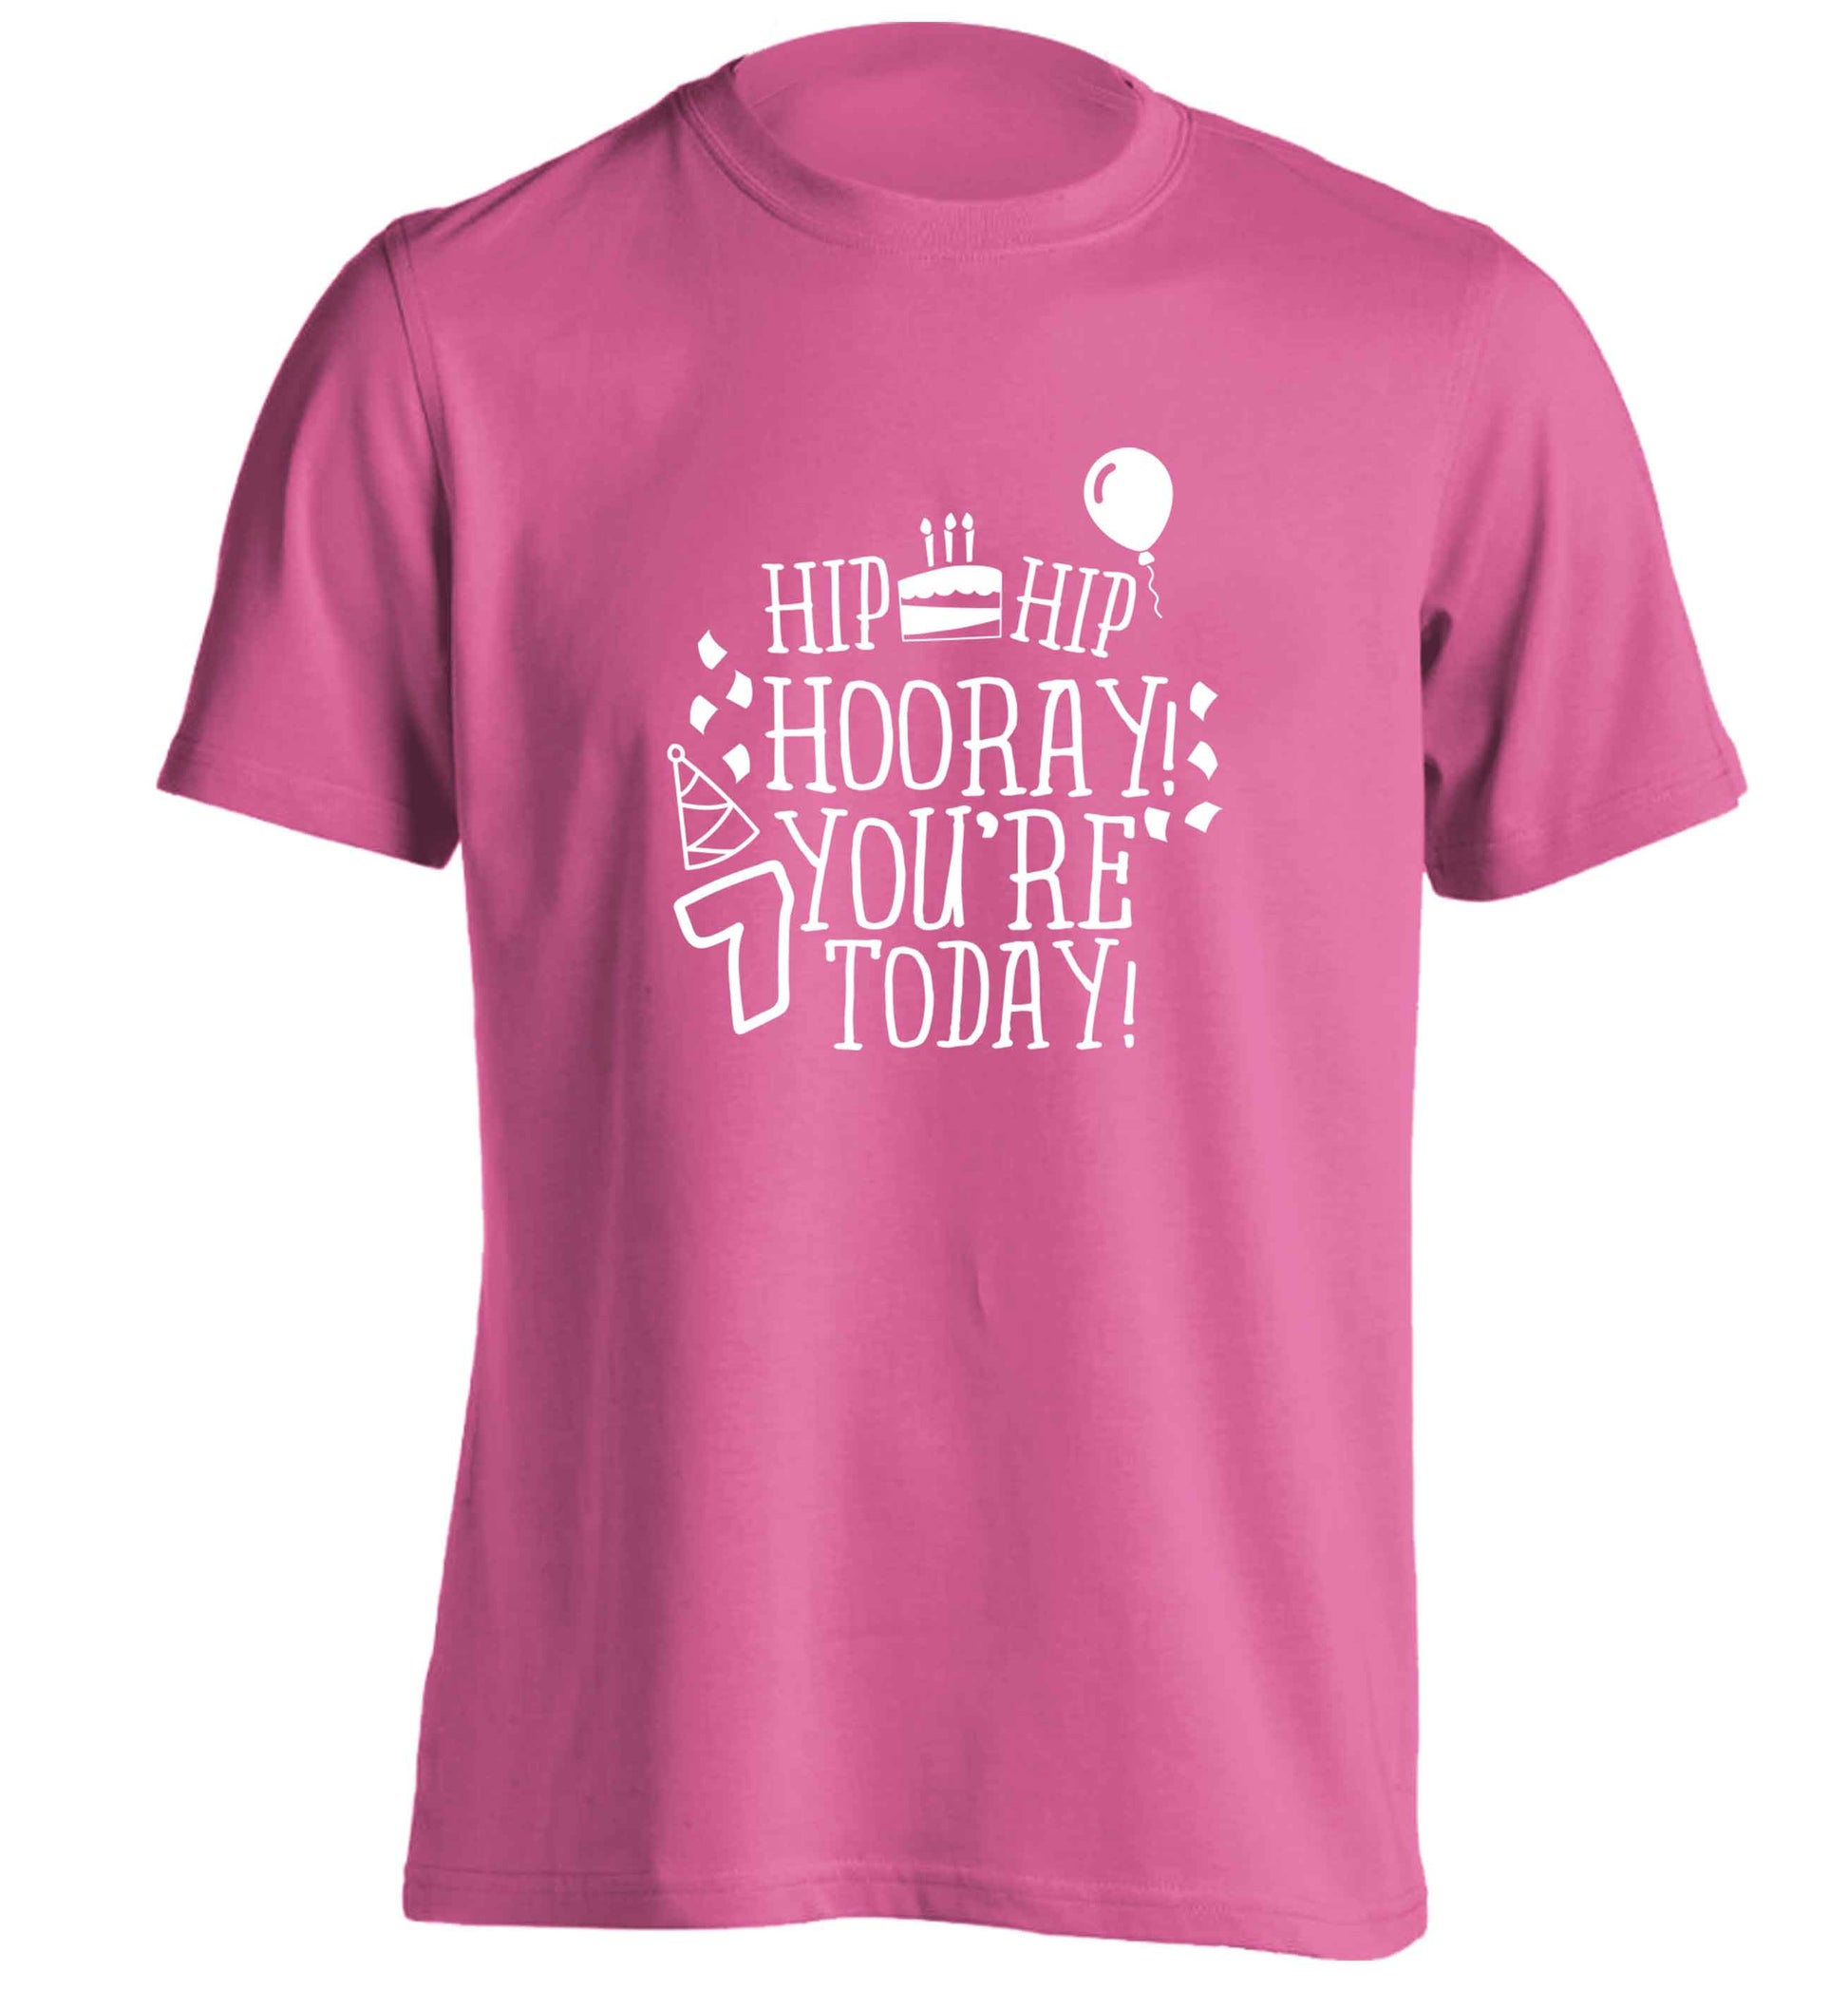 Hip hip hooray you're seven today! adults unisex pink Tshirt 2XL